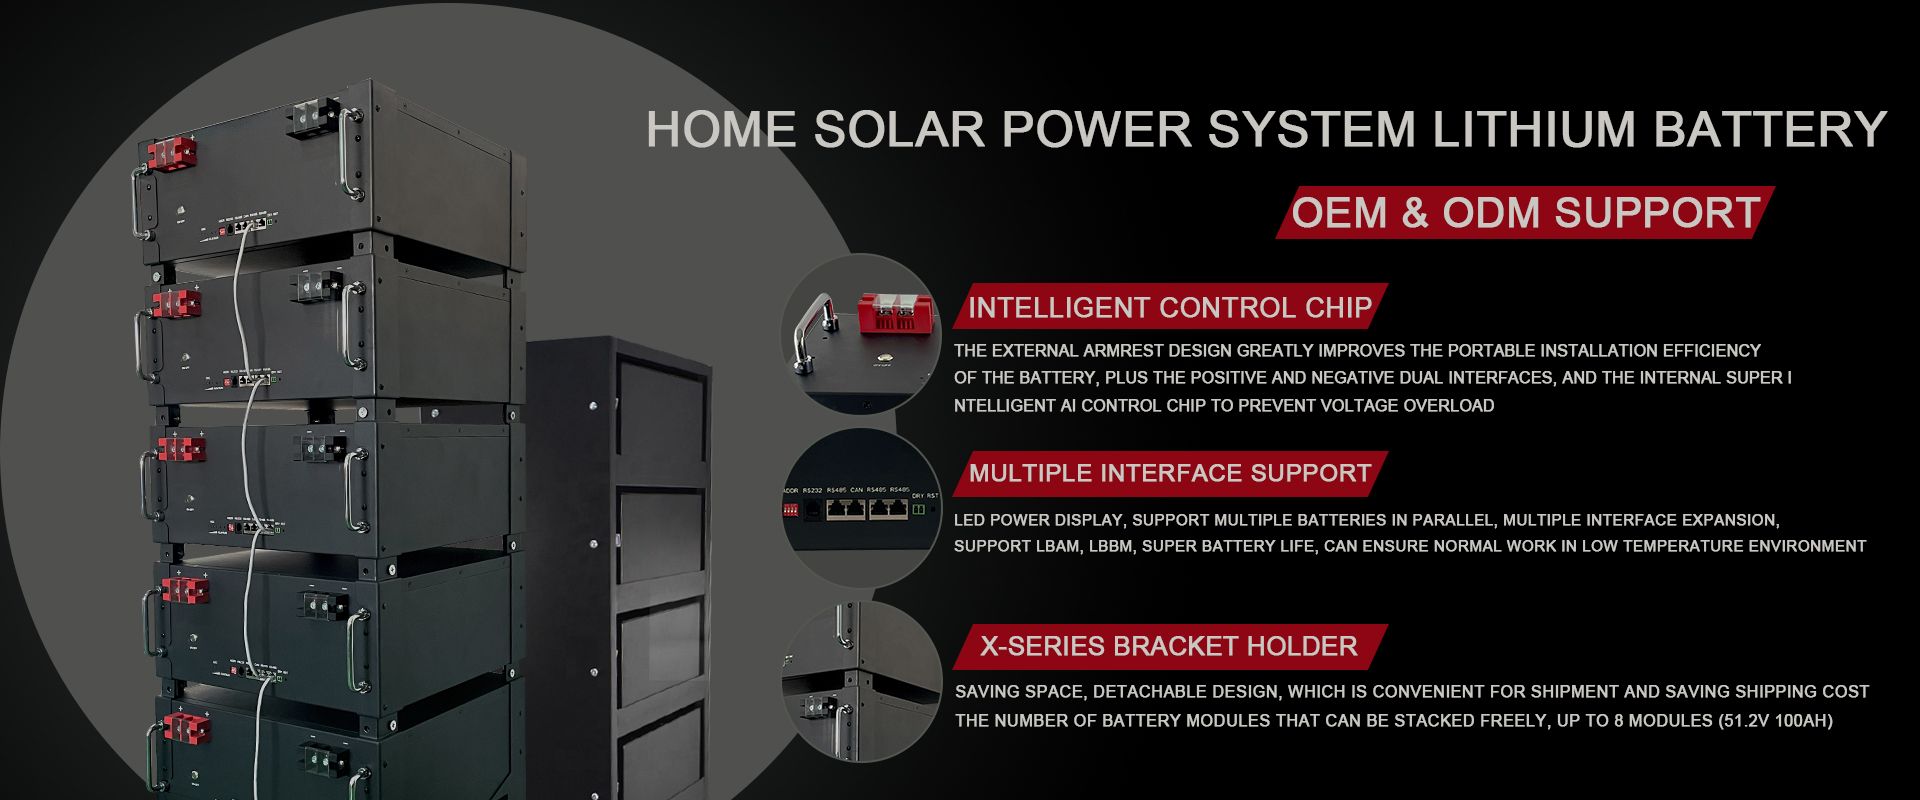 Home Power Generation System